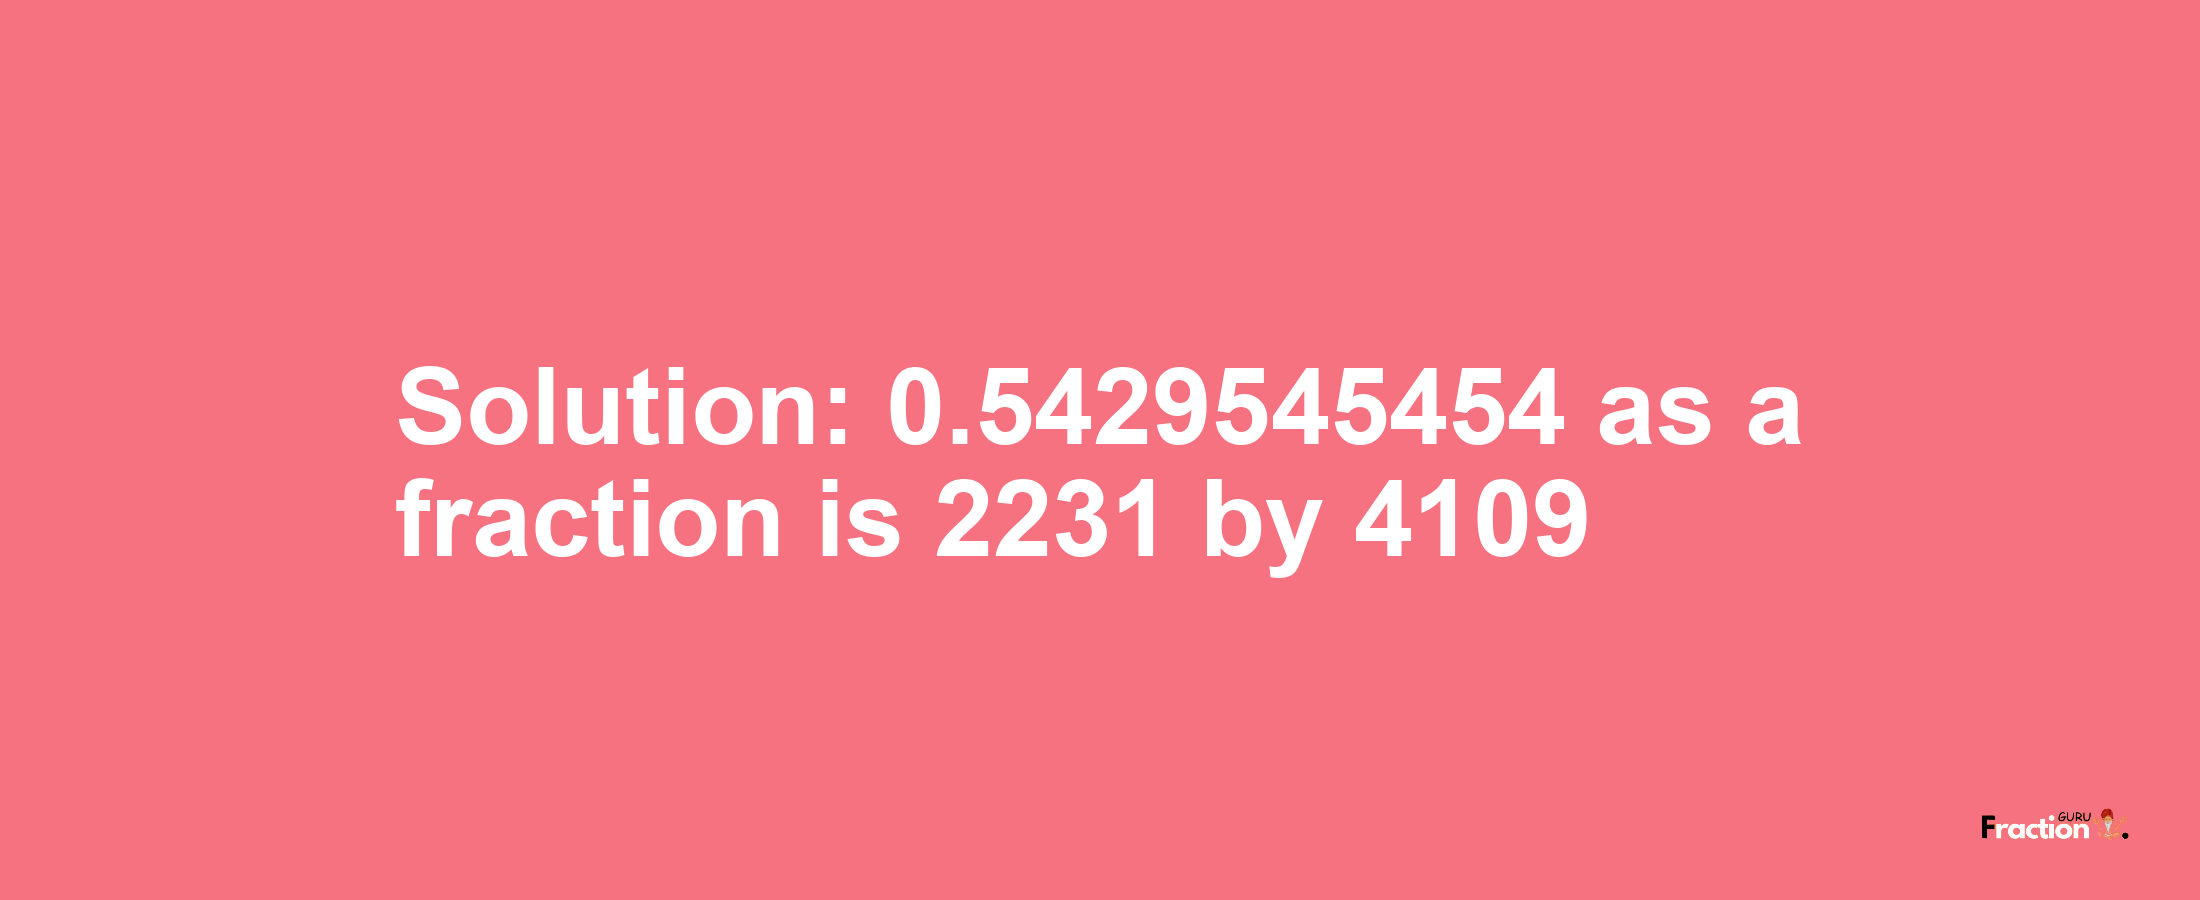 Solution:0.5429545454 as a fraction is 2231/4109